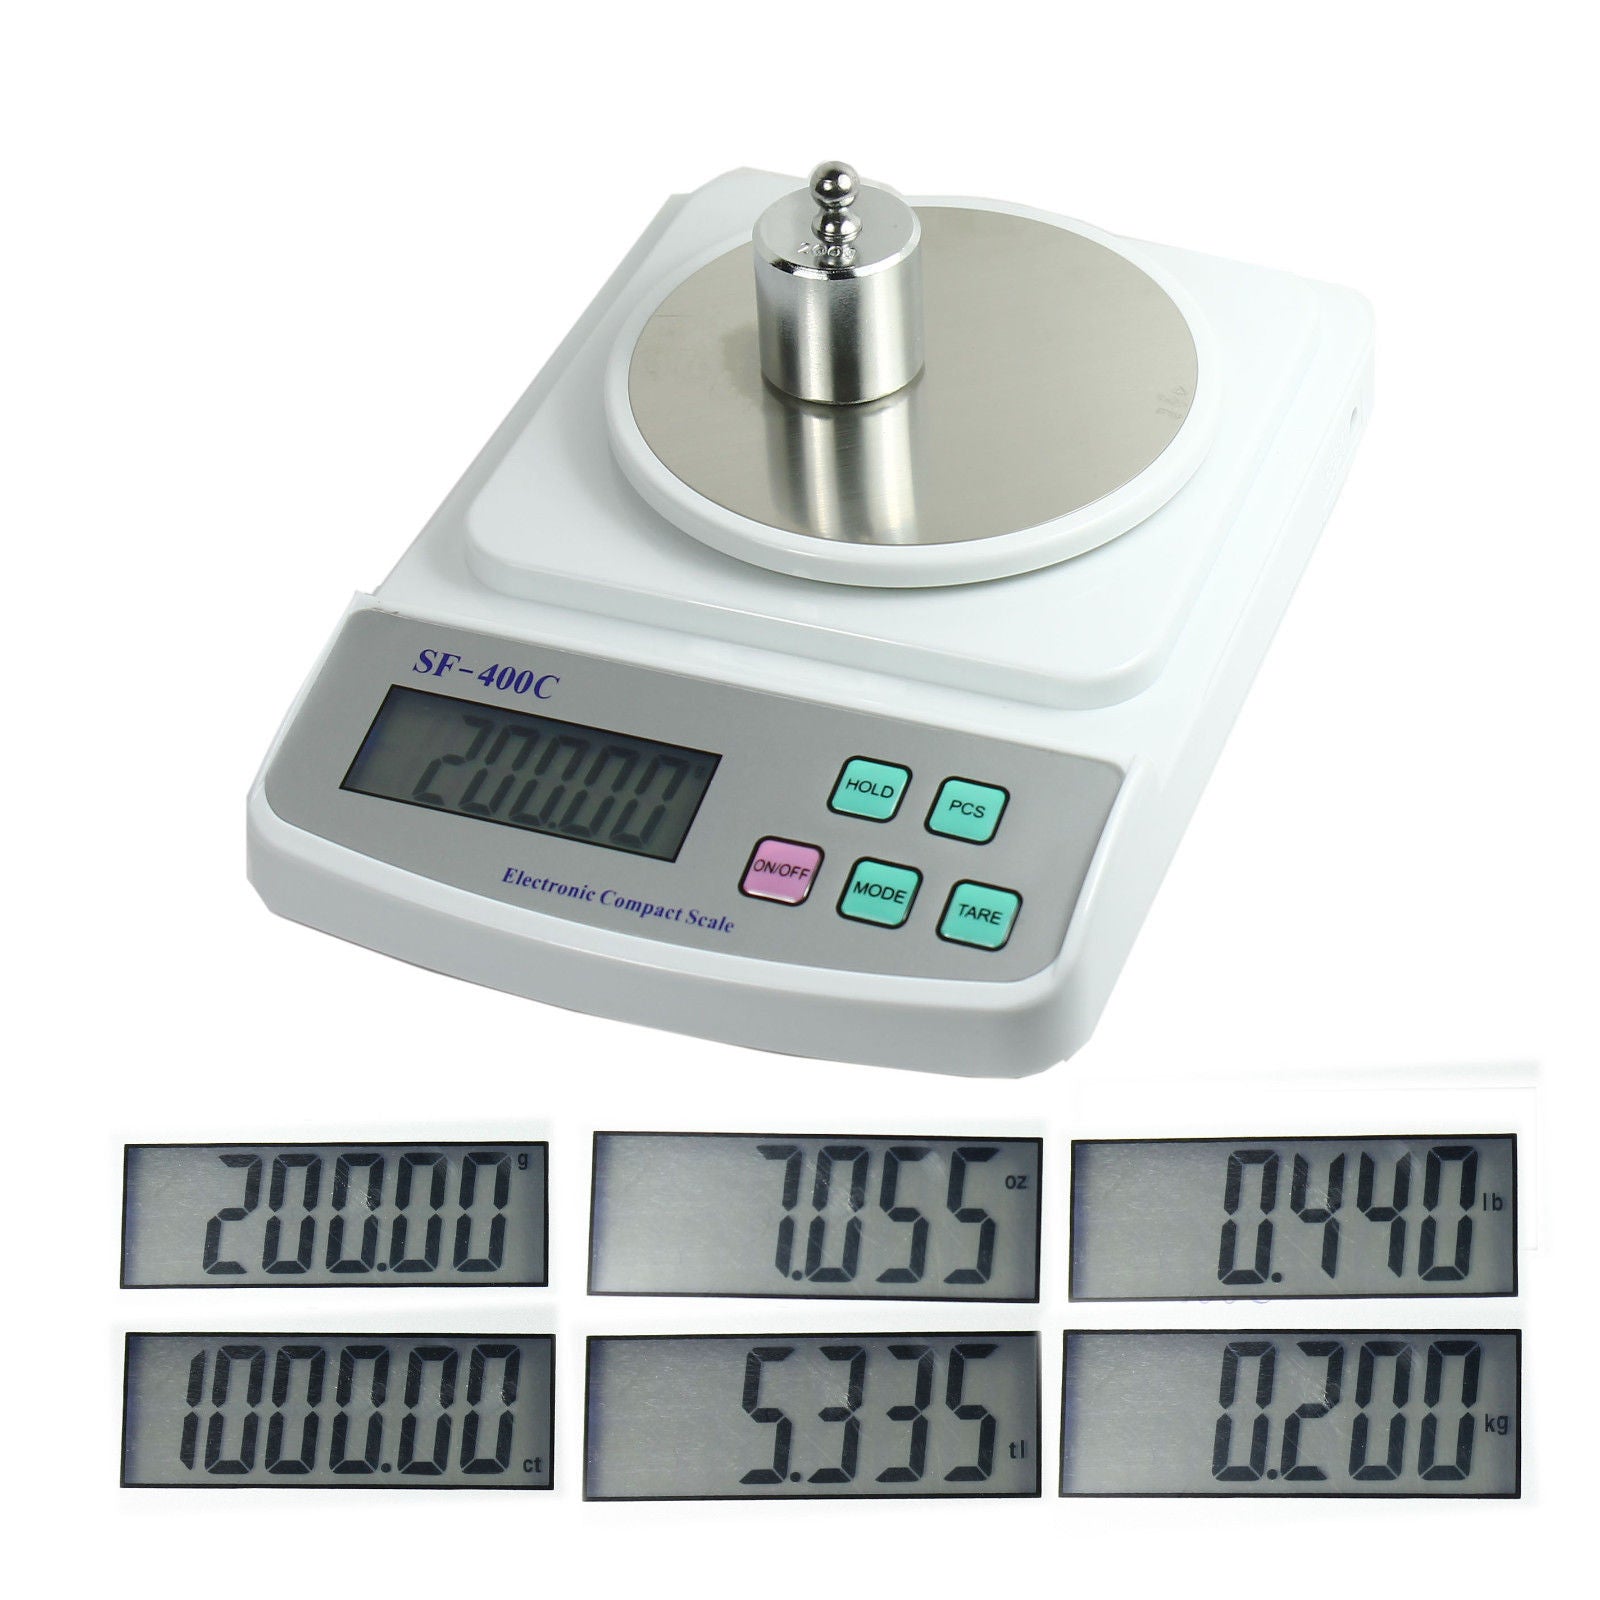 Digital Scale 500g x 0.01g for Precision Weighing & Counting - USB Wal 